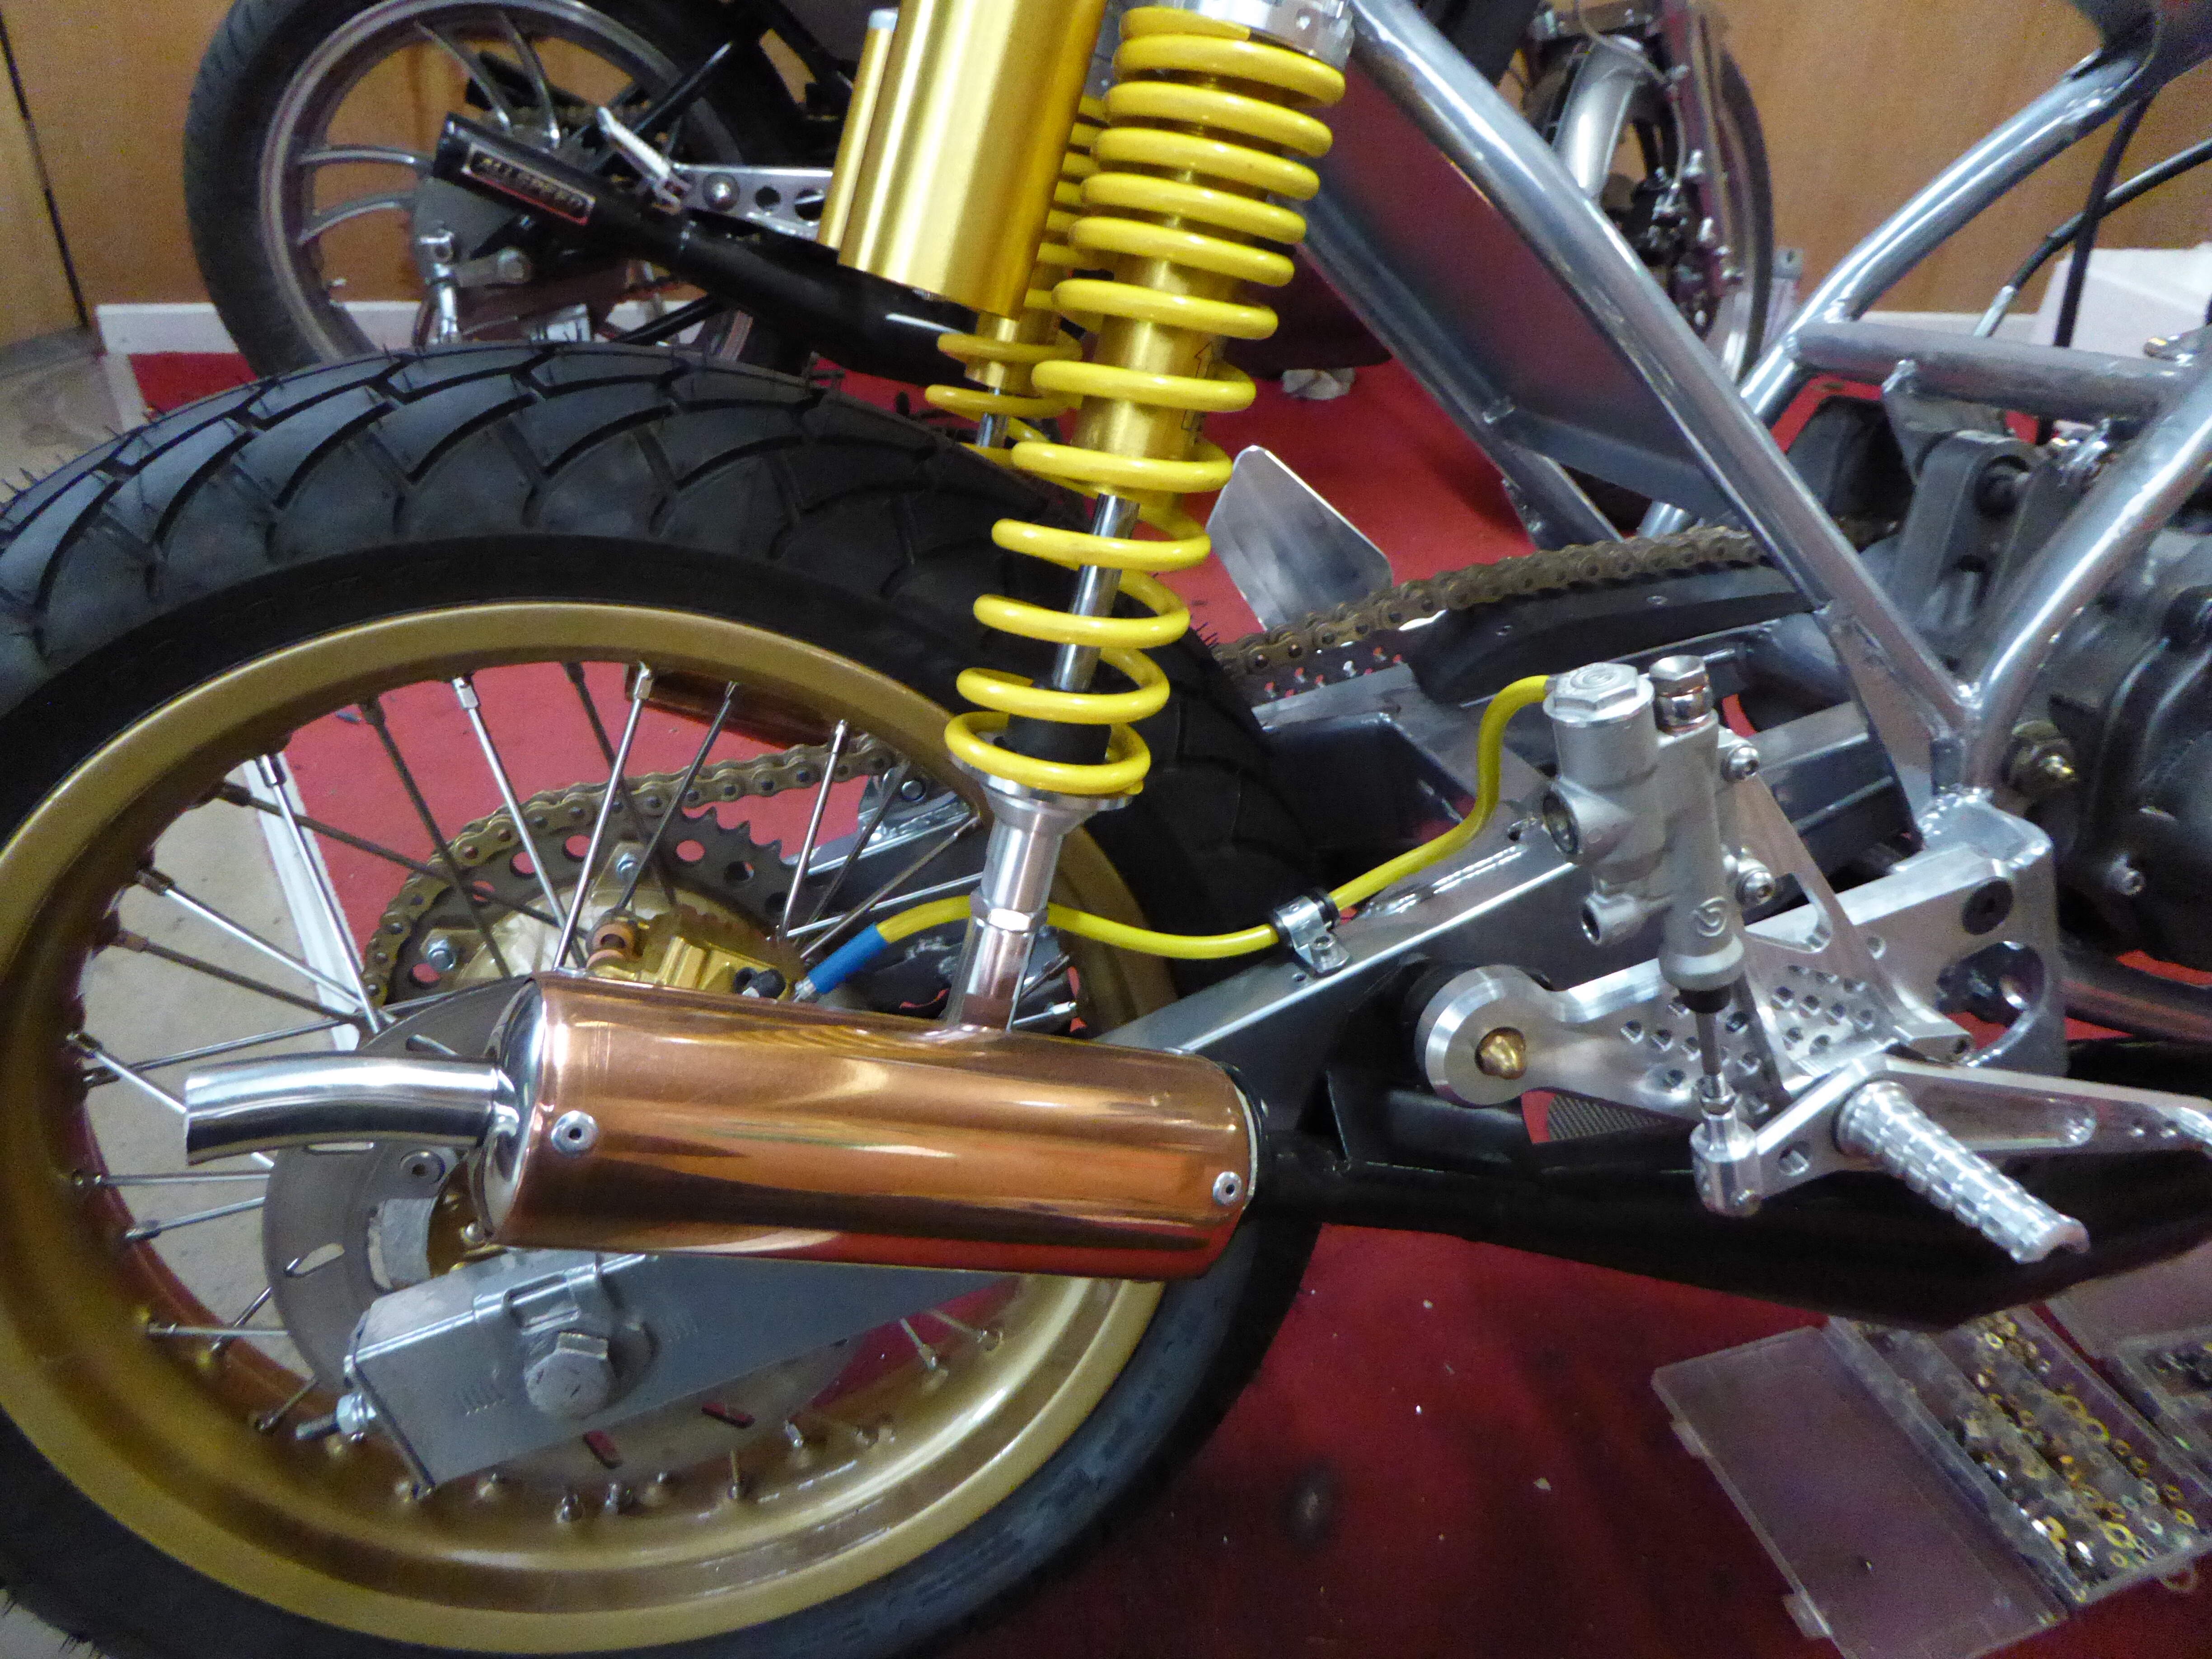 twin shocks , bespoke rear brake and copper cans